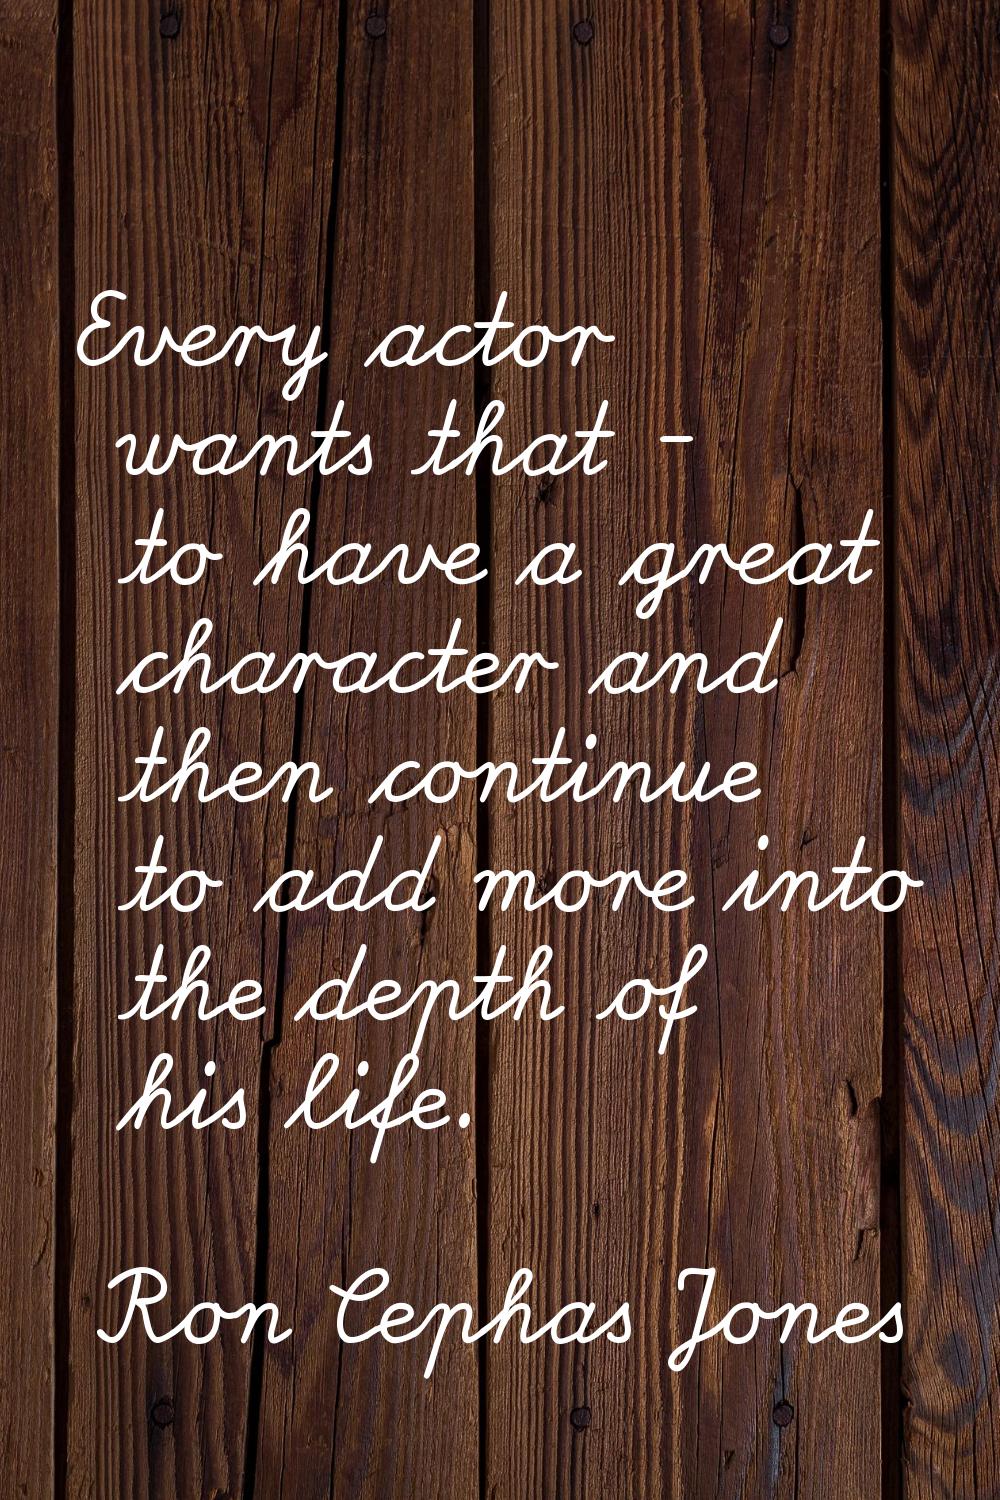 Every actor wants that - to have a great character and then continue to add more into the depth of 